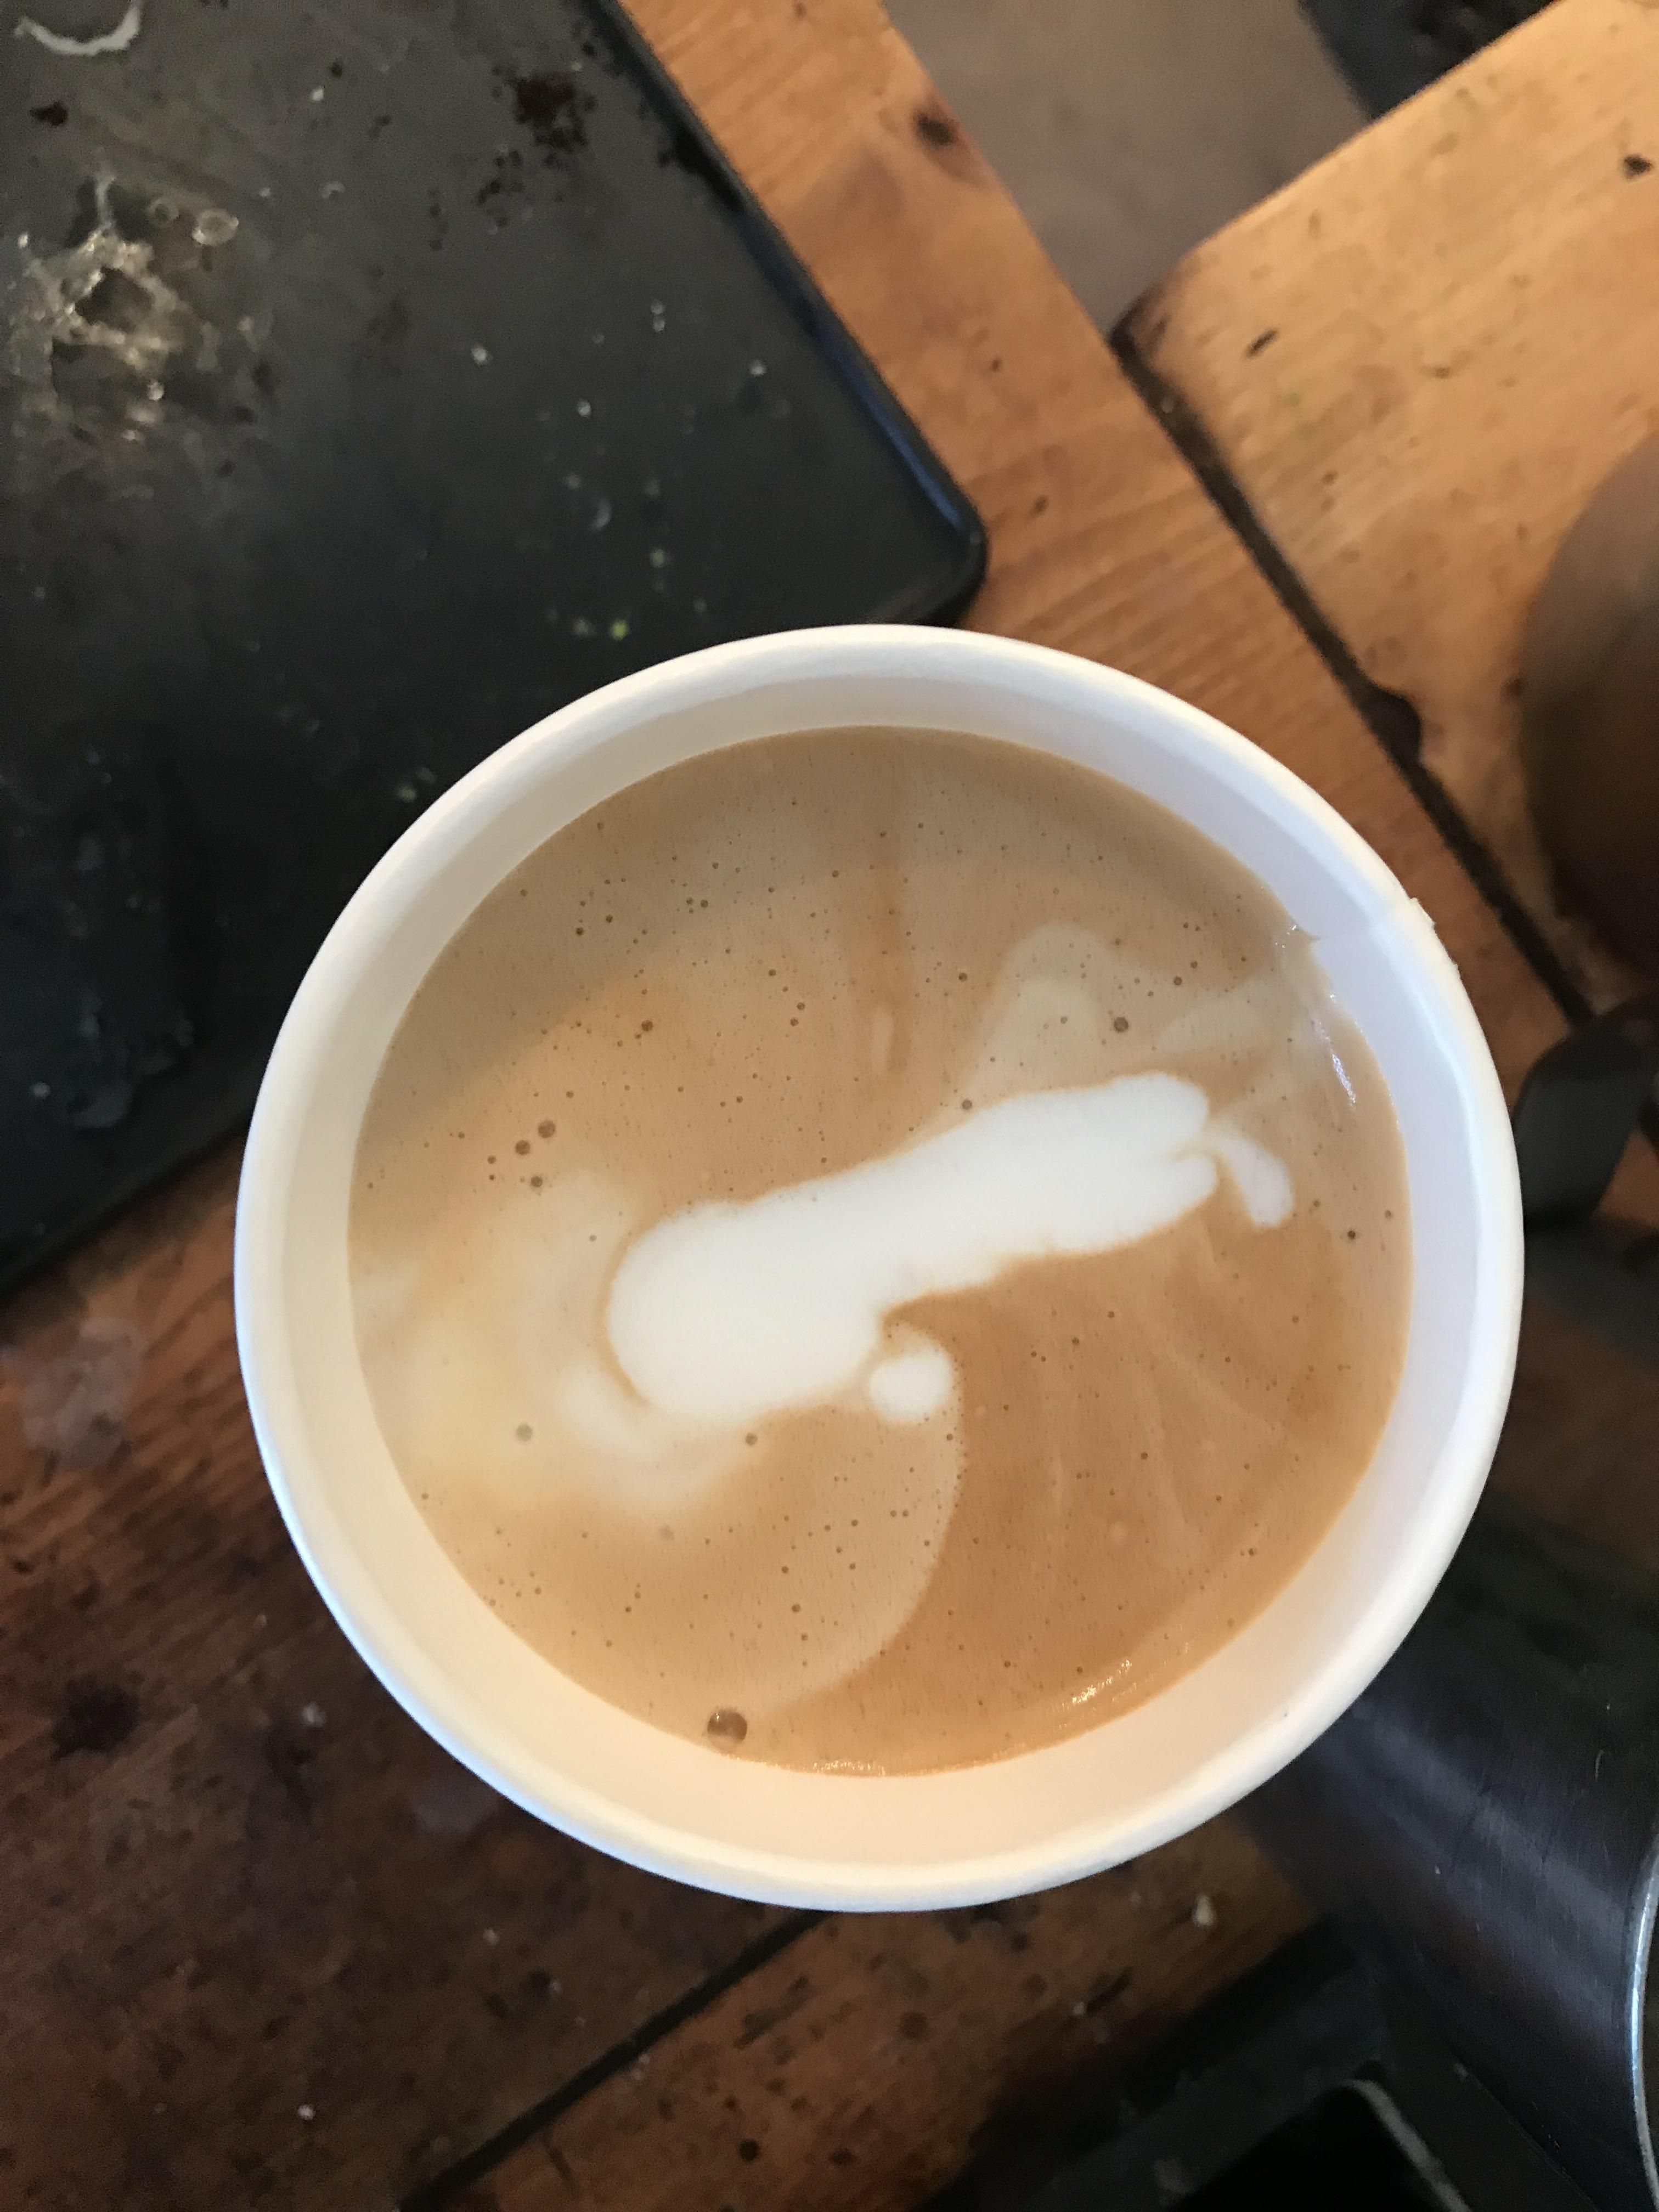 So I’ve worked as a barista for the last month or so, really been trying to figure out latte art. Thought I’d share my first success here (: